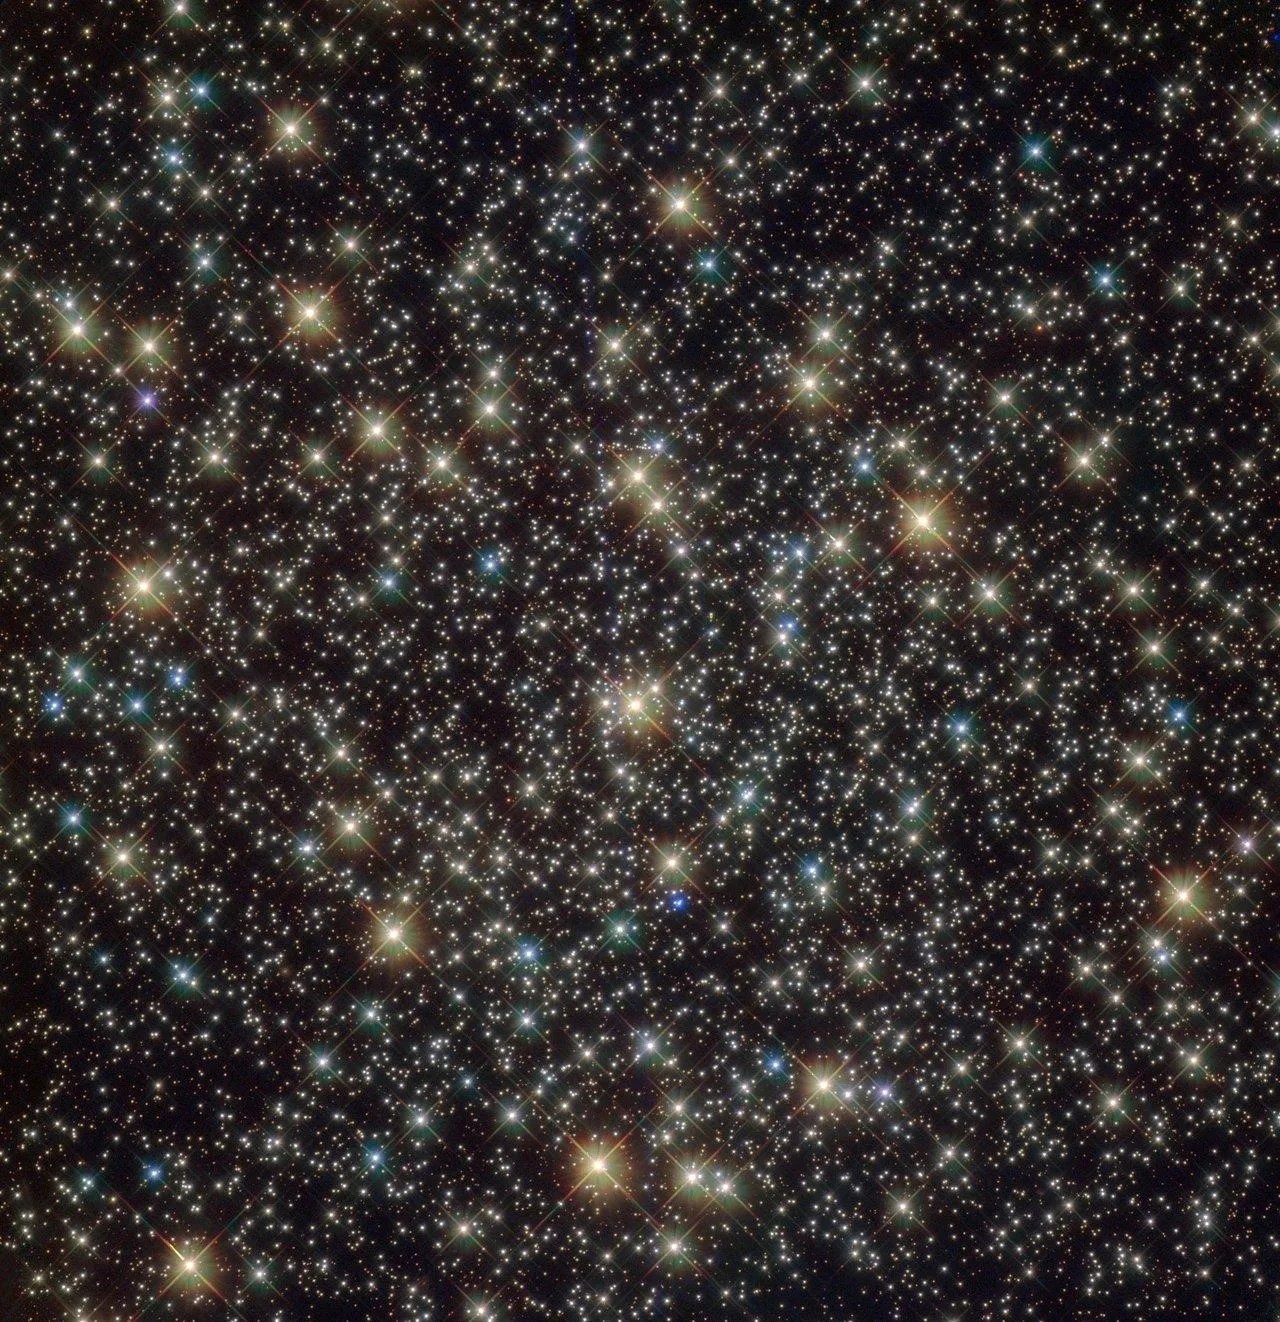 A field of large bright yellow stars and smaller blue and white stars.